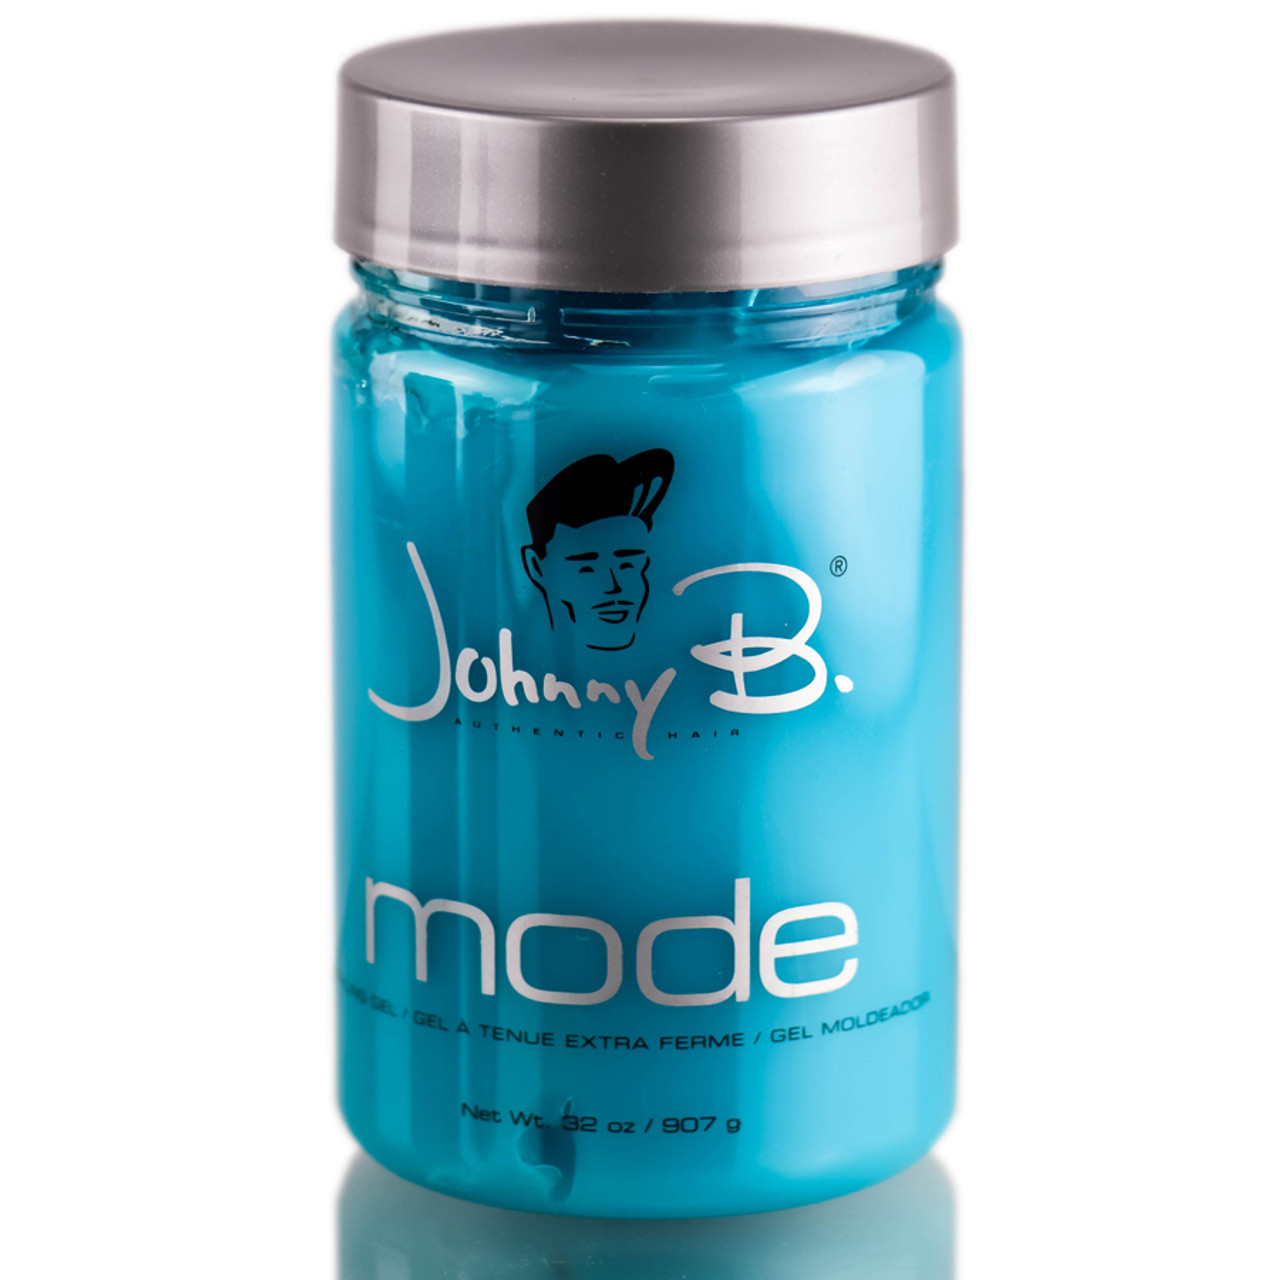 Johnny B Mode Hair Styling Gel for Men, Alcohol-Free, Water